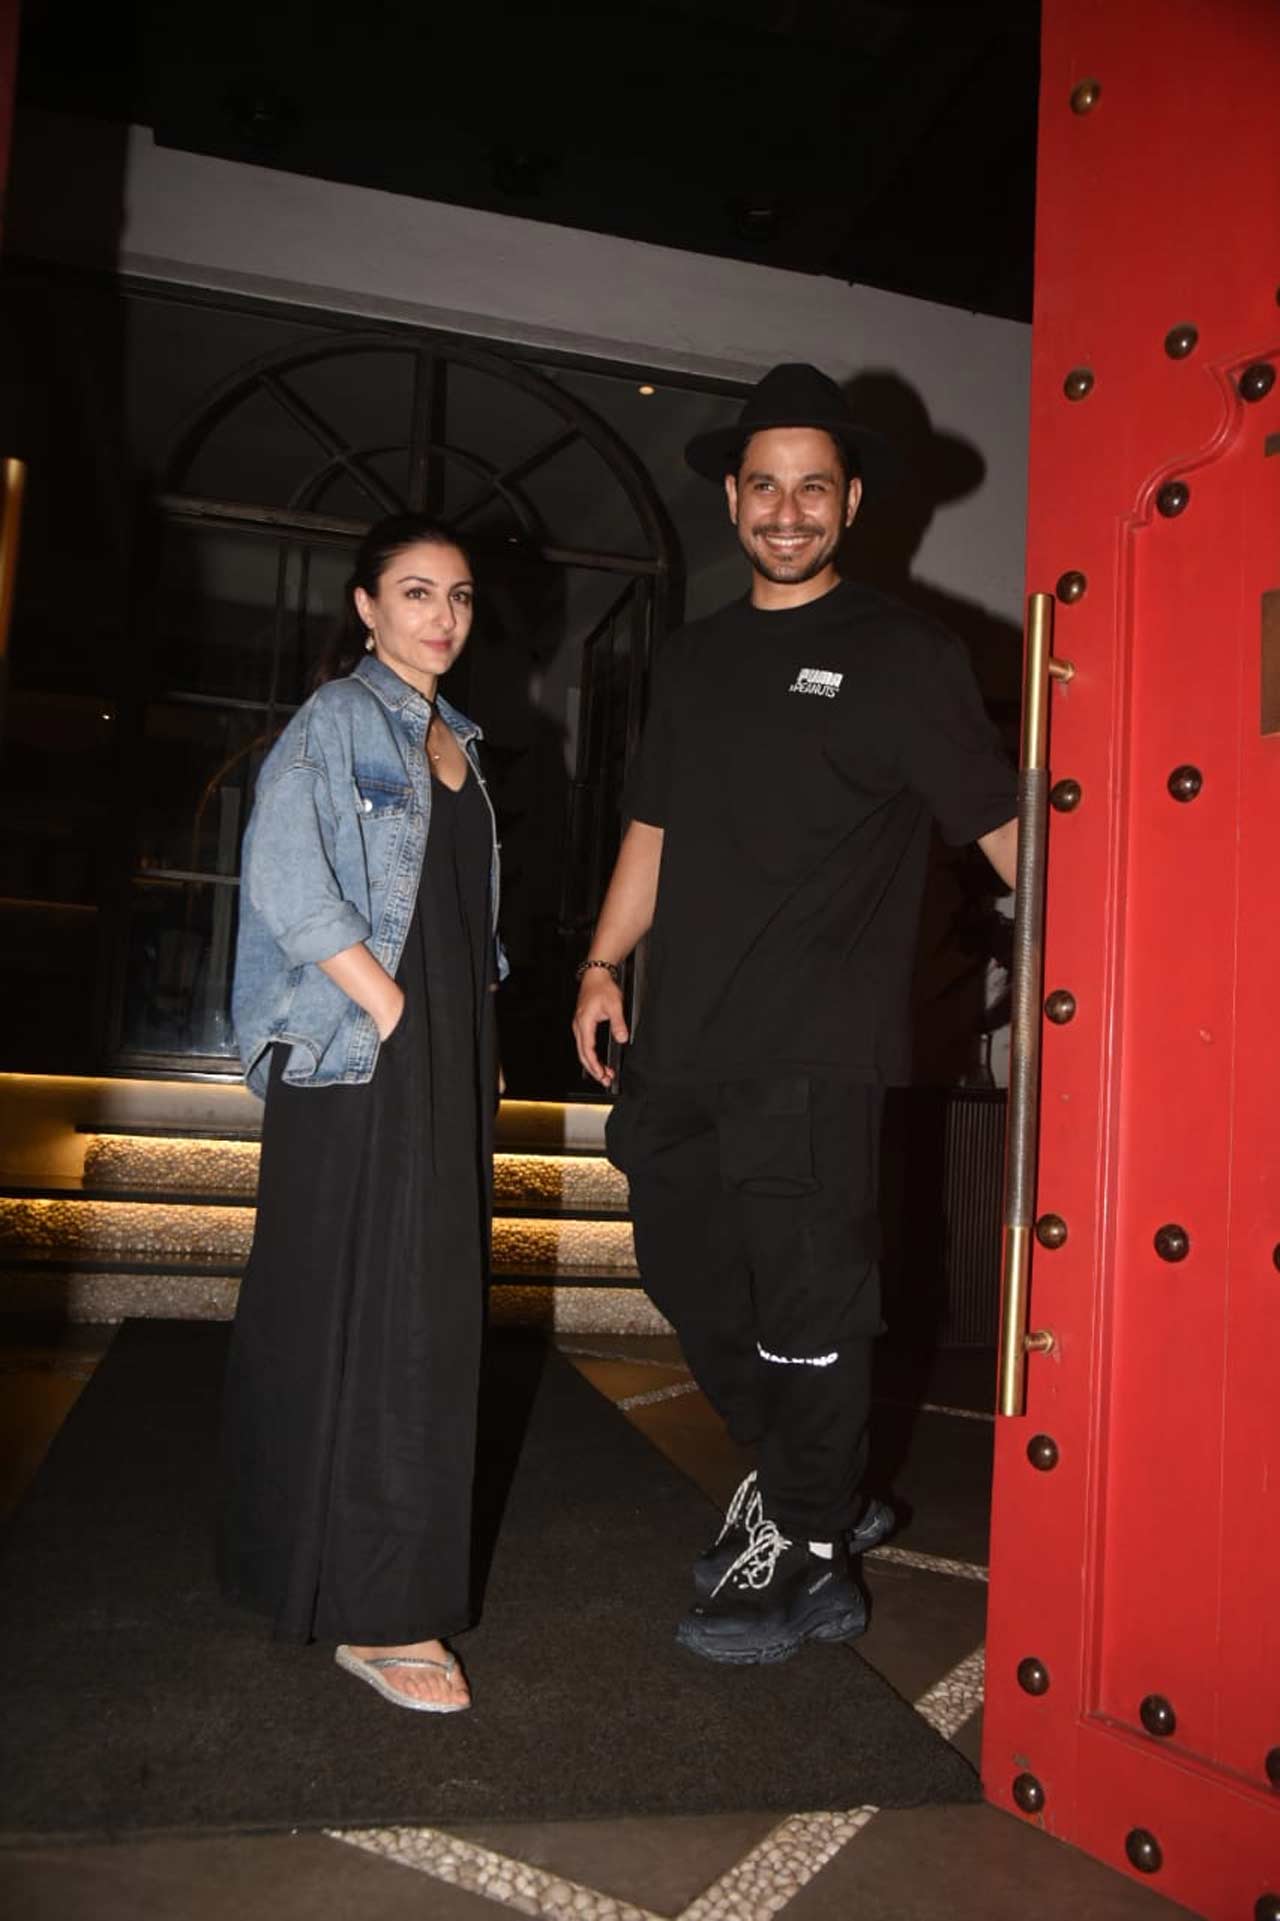 Bollywood couple Kunal Kemmu, Soha Ali Khan were also spotted in Bandra. Kemmu finally managed to fulfil his long-standing dream of visiting Ladakh. Last month, the 'Kalyug' star updated his Instagram followers that he is currently in the land of high passes. 